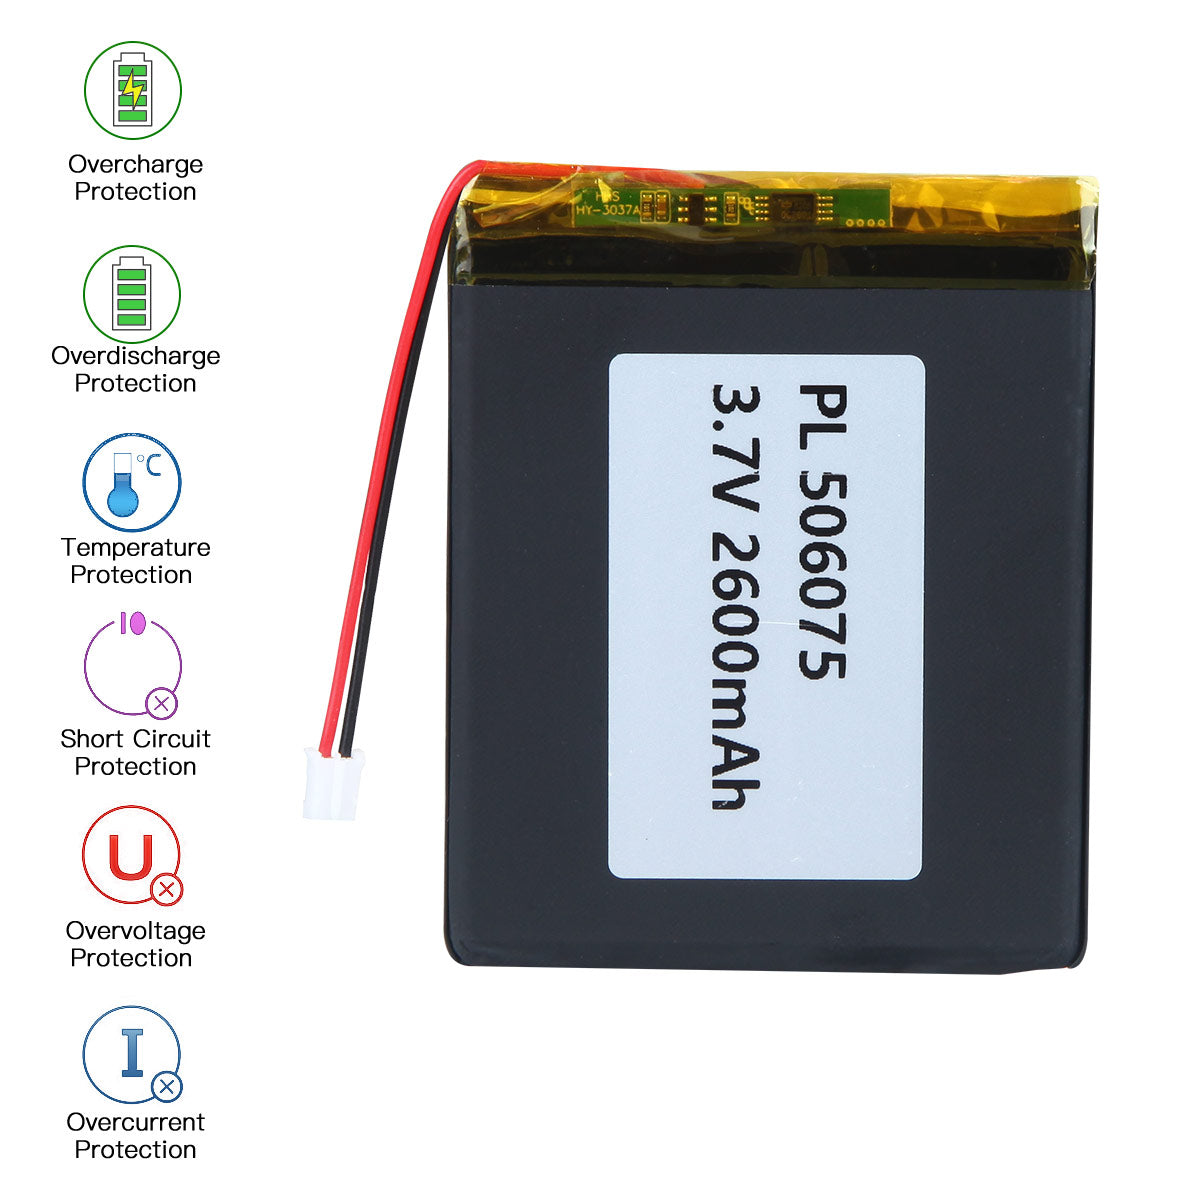 YDL 3.7V 2600mAh 506075 Rechargeable Lithium Polymer Battery Length 77mm